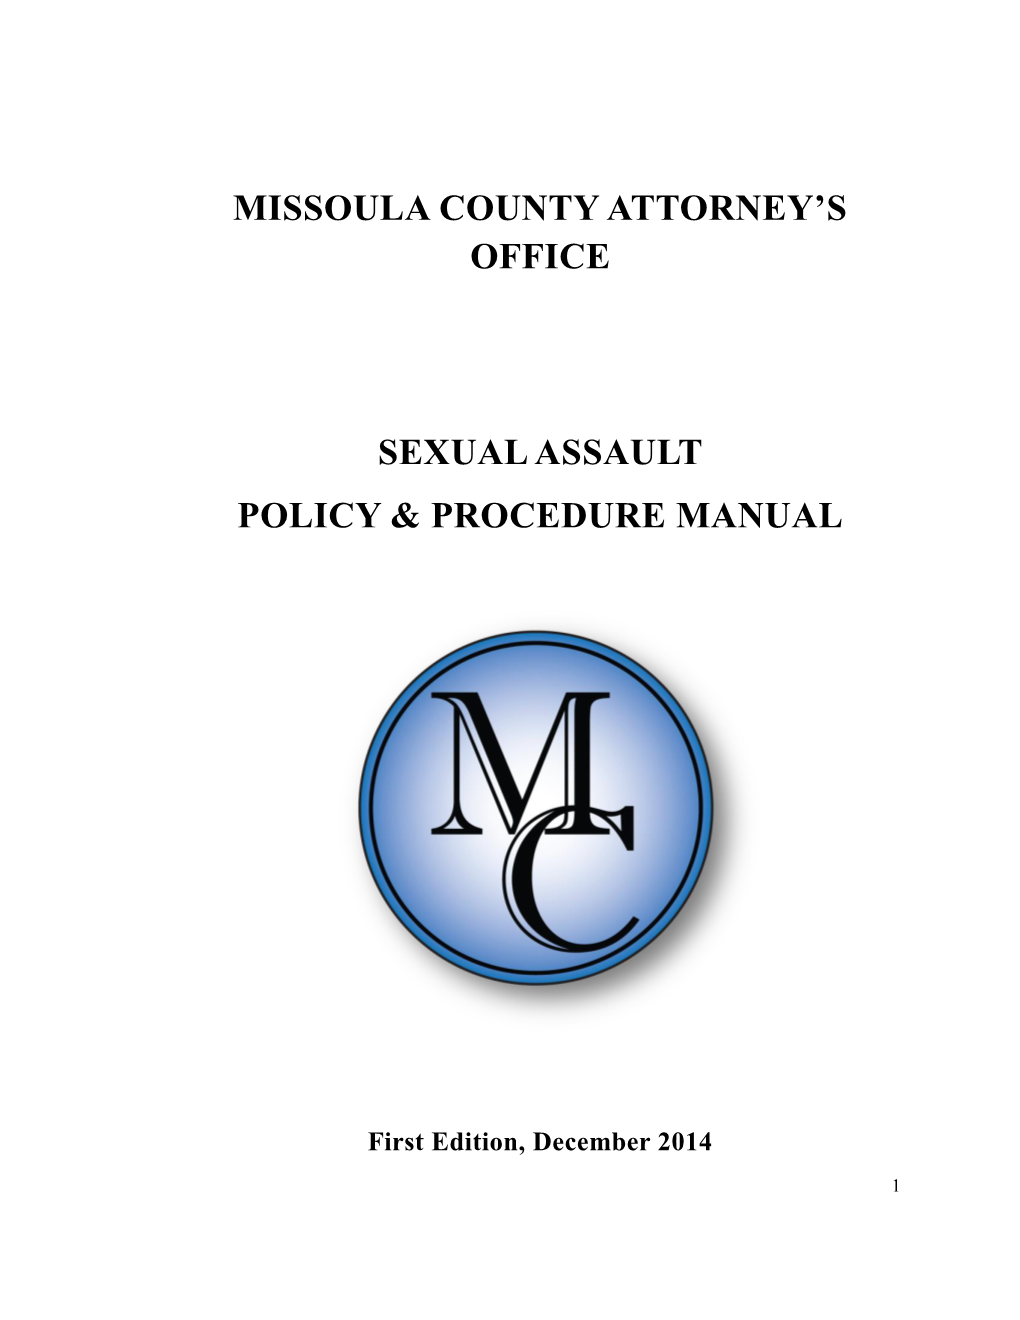 Missoula County Attorney's Office, Sexual Assault Policy & Procedure